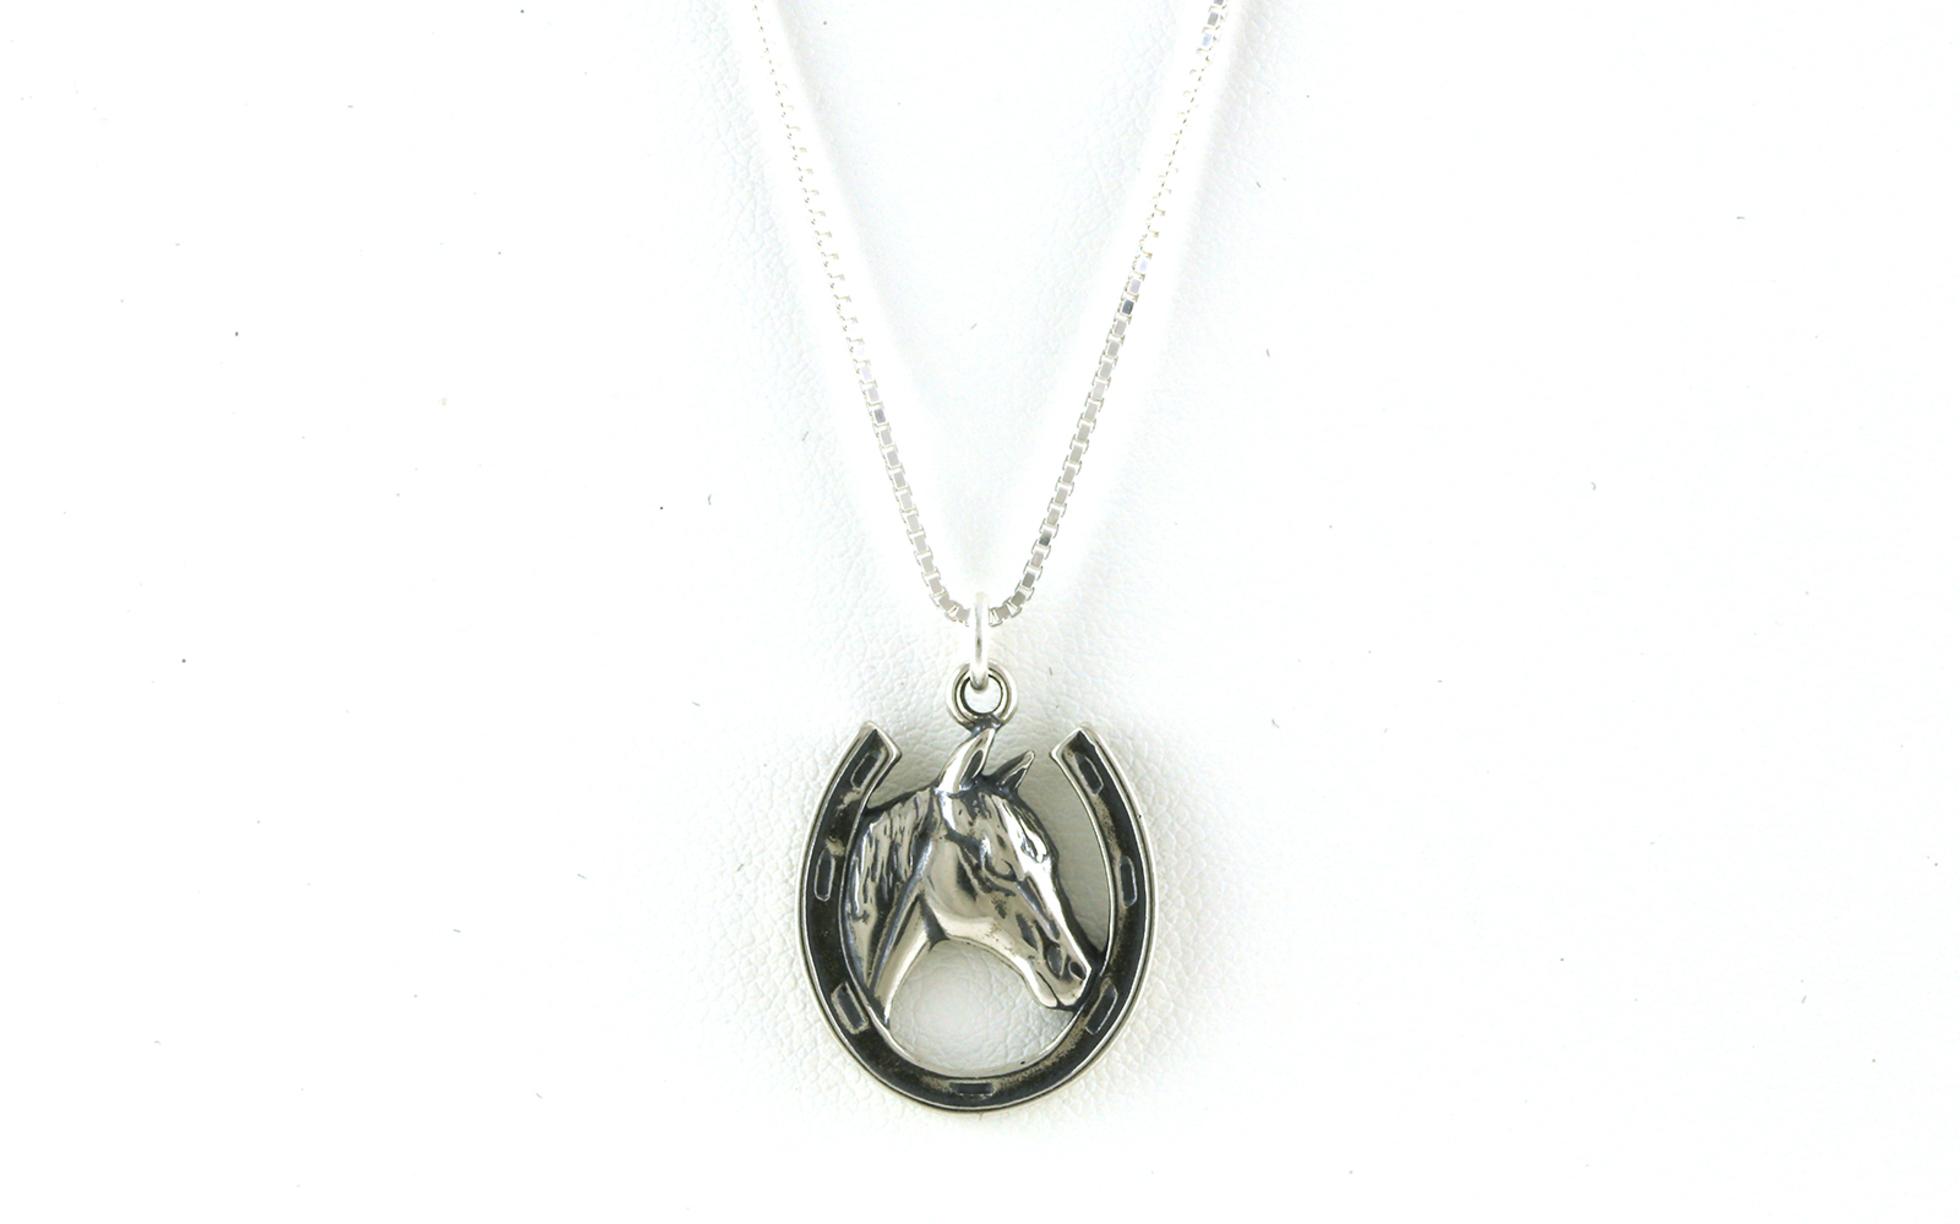 Horseshoe and Horse Head Charm Necklace in Sterling Silver